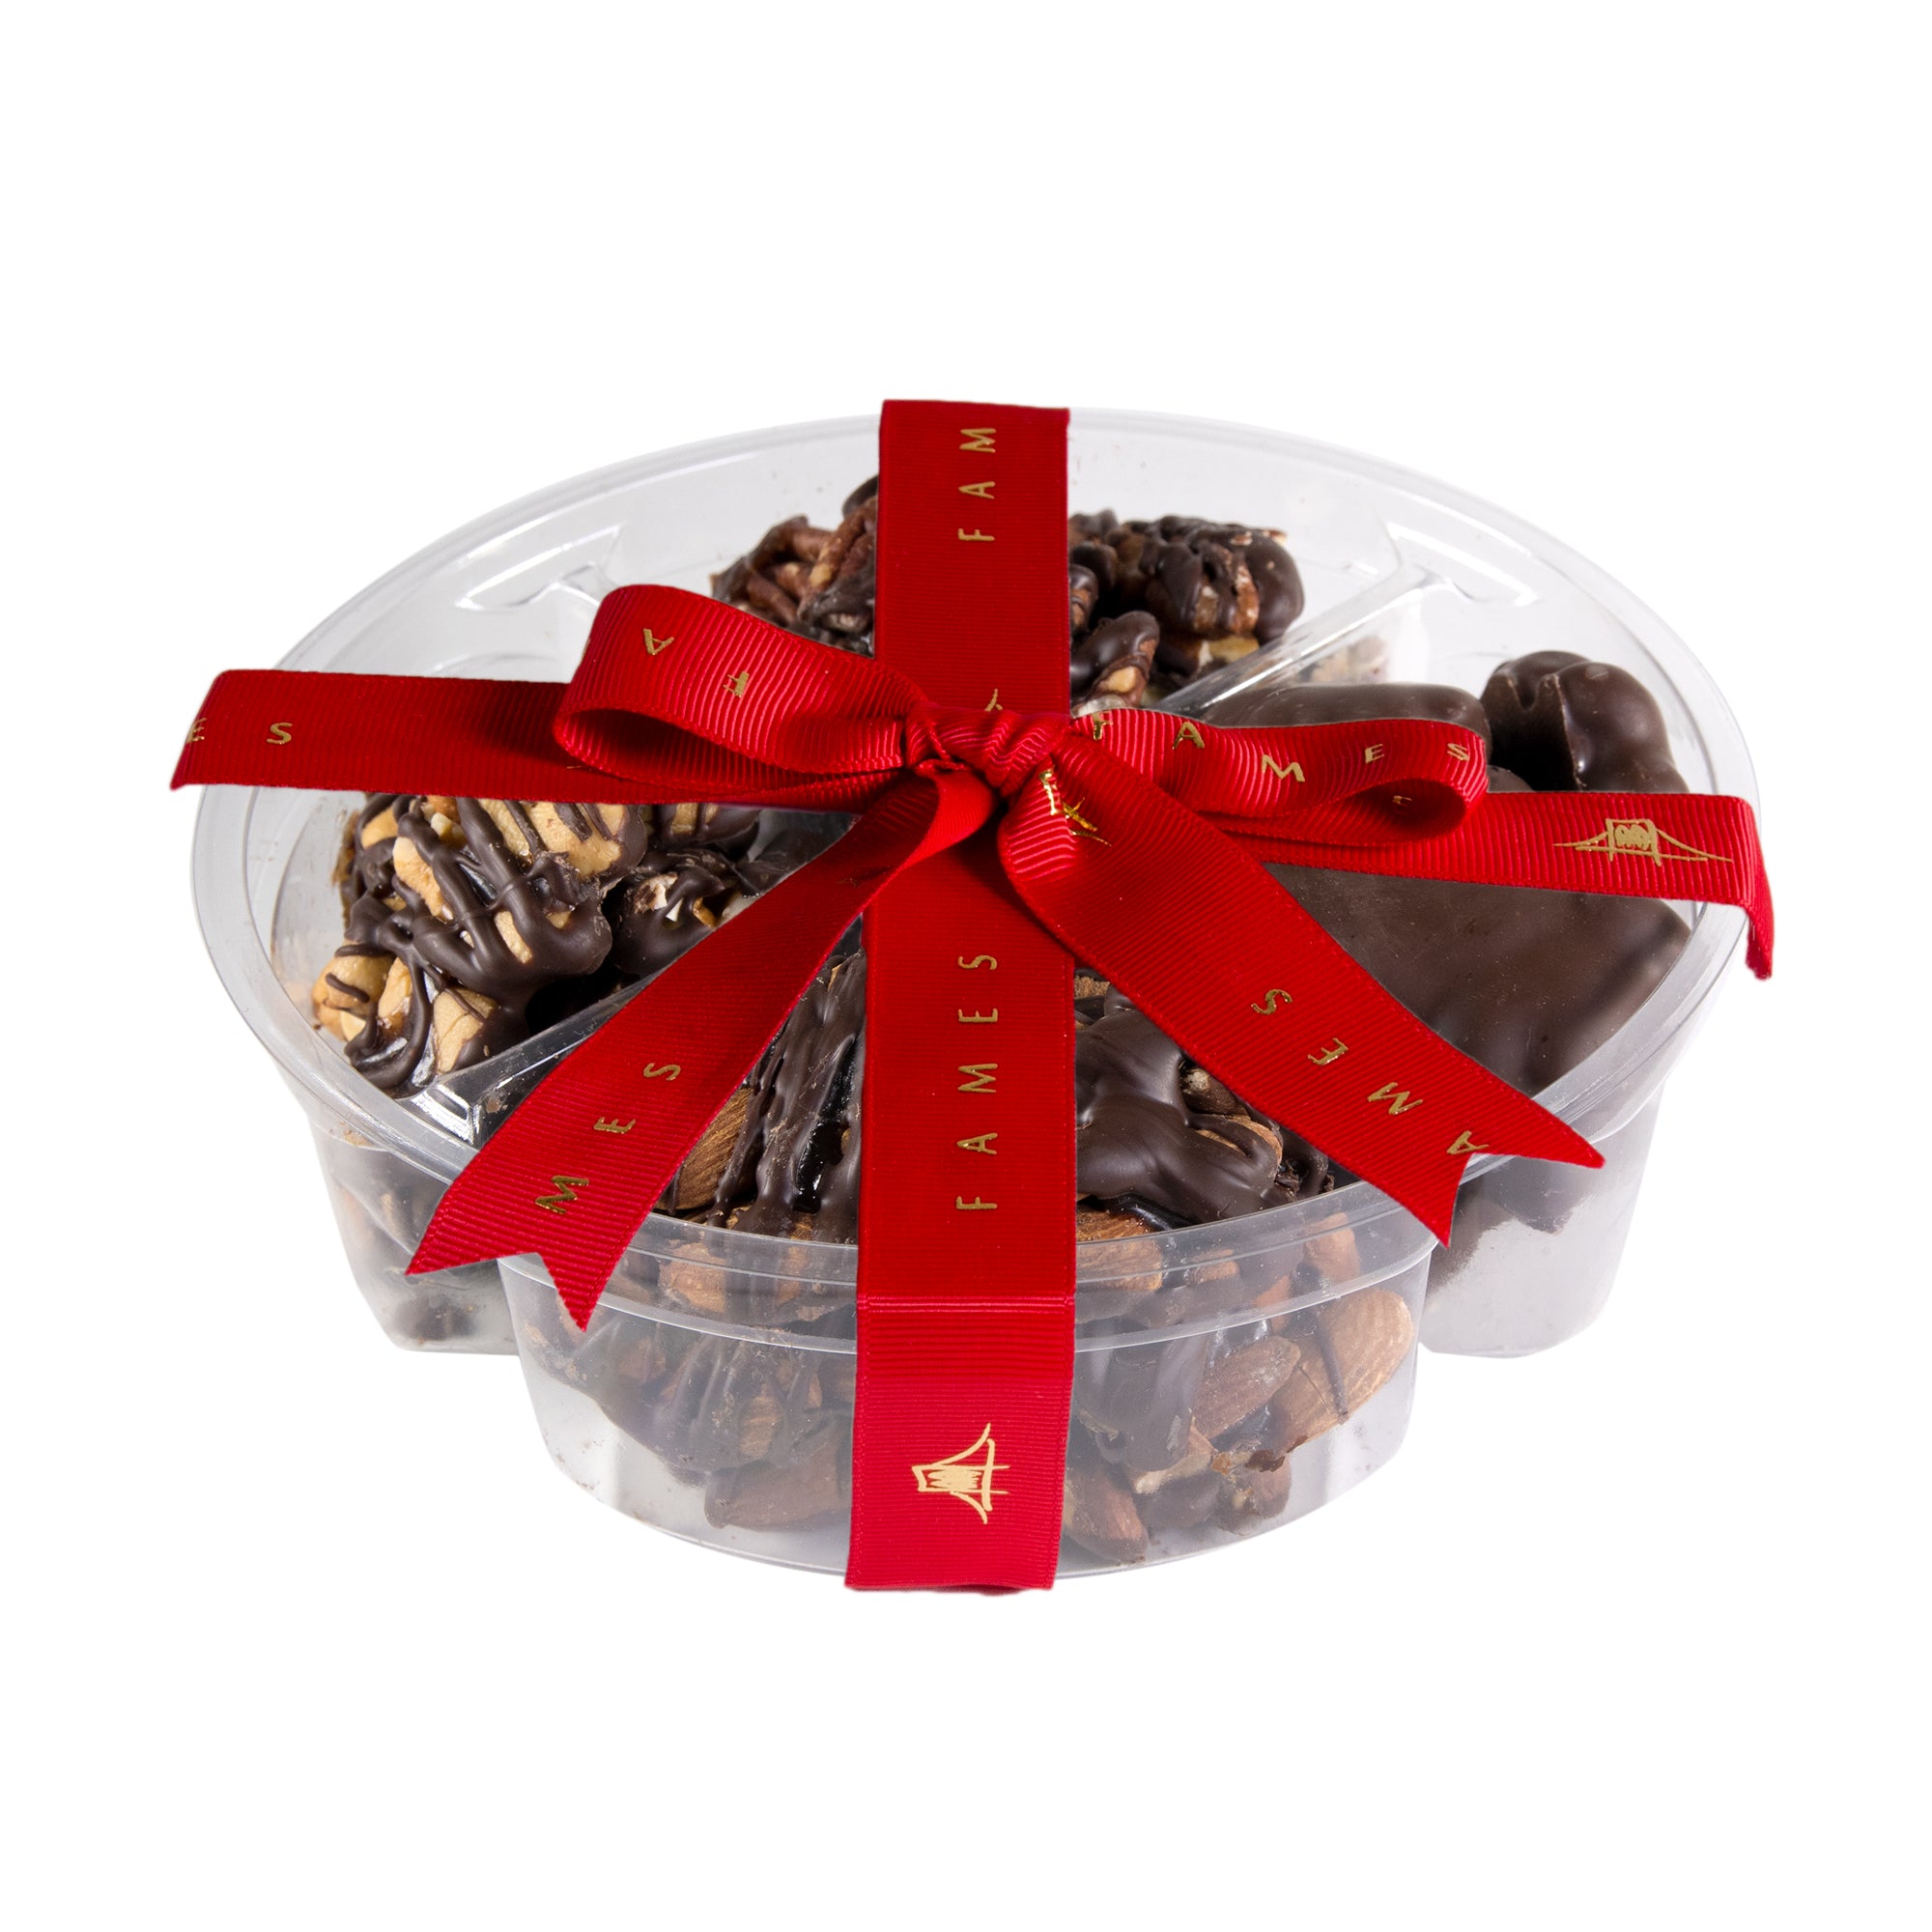 Select 4 chocolates you'd like for your custom chocolate assortment  Fames Chocolate   